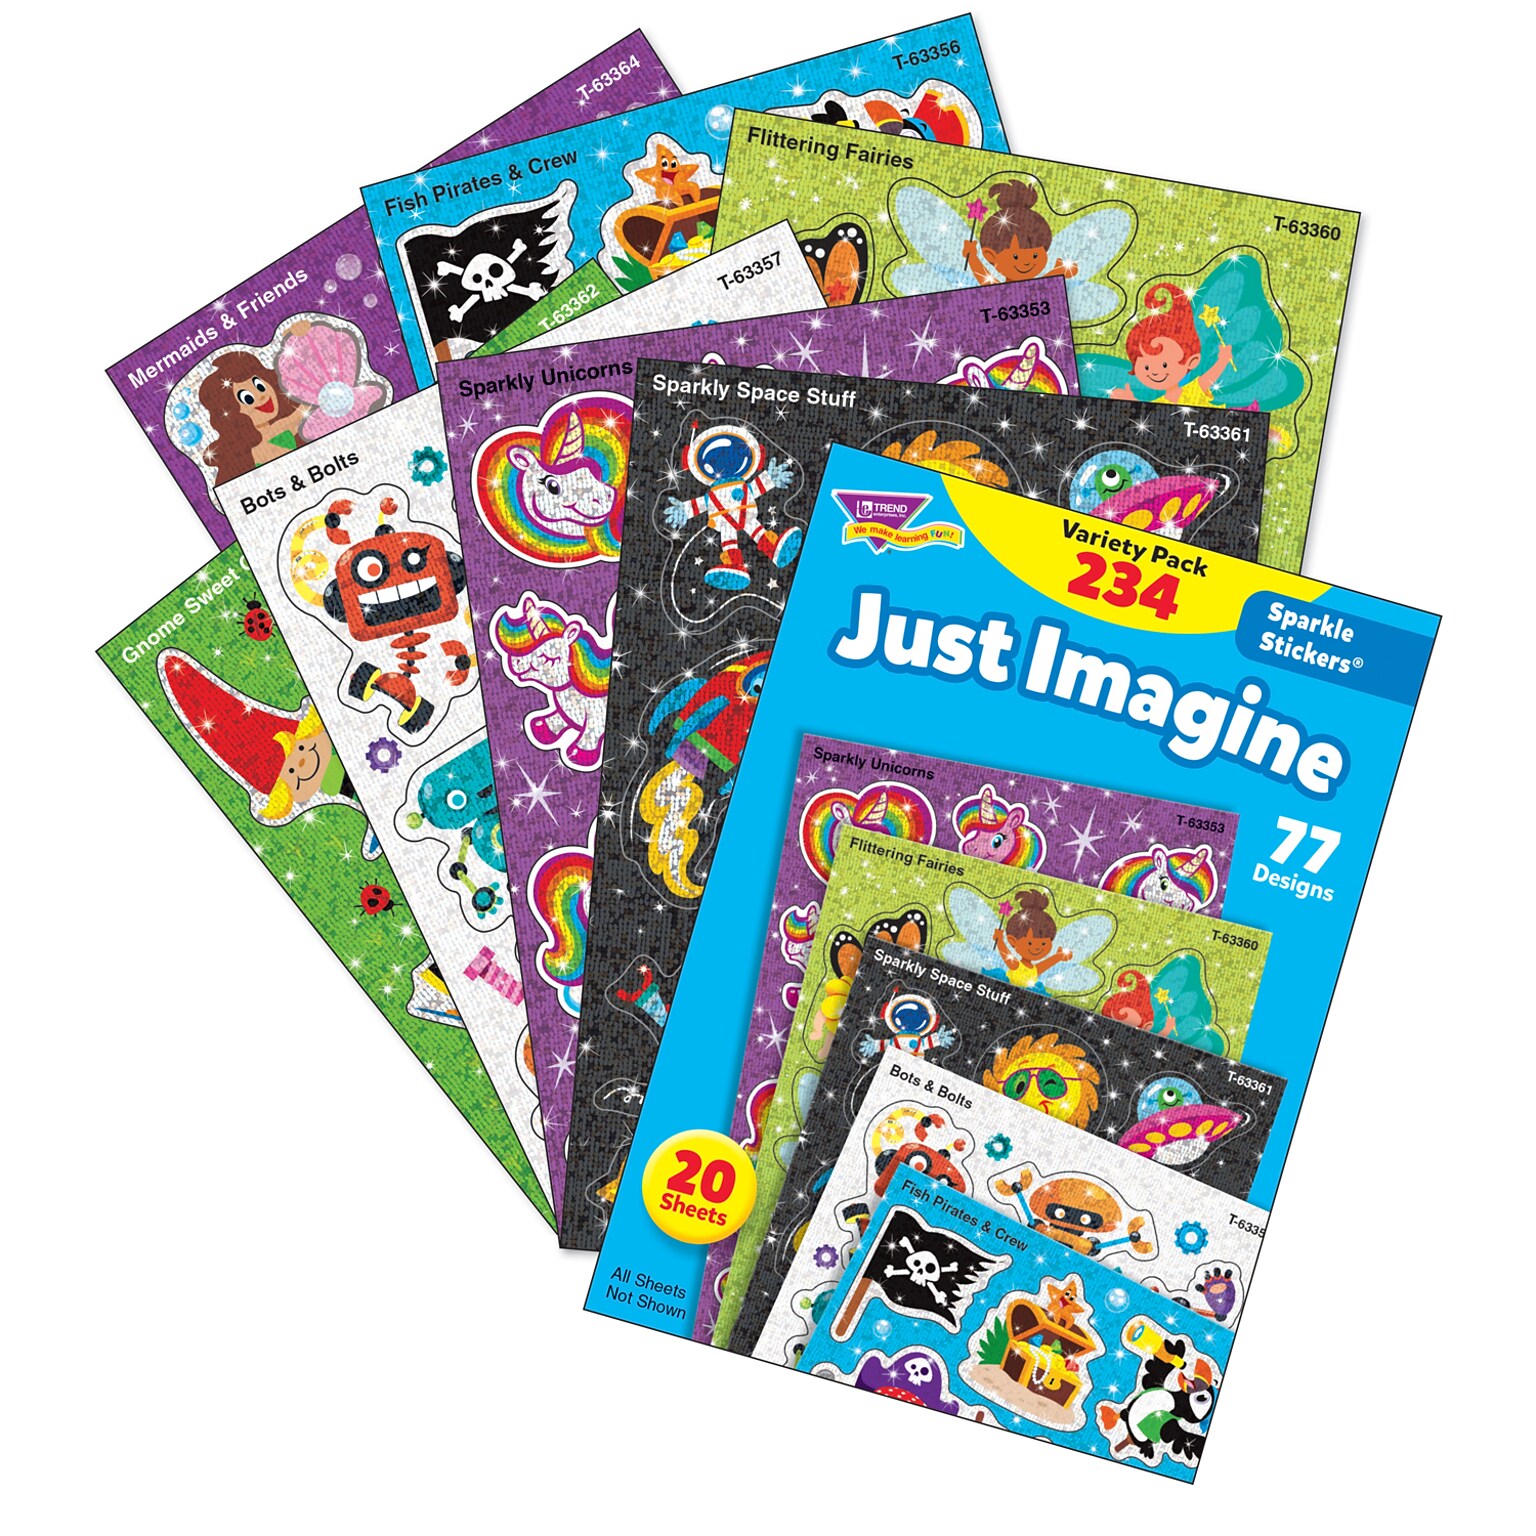 TREND Just Imagine Sparkle Stickers® Variety Pack , 234 Pack (T-63911)